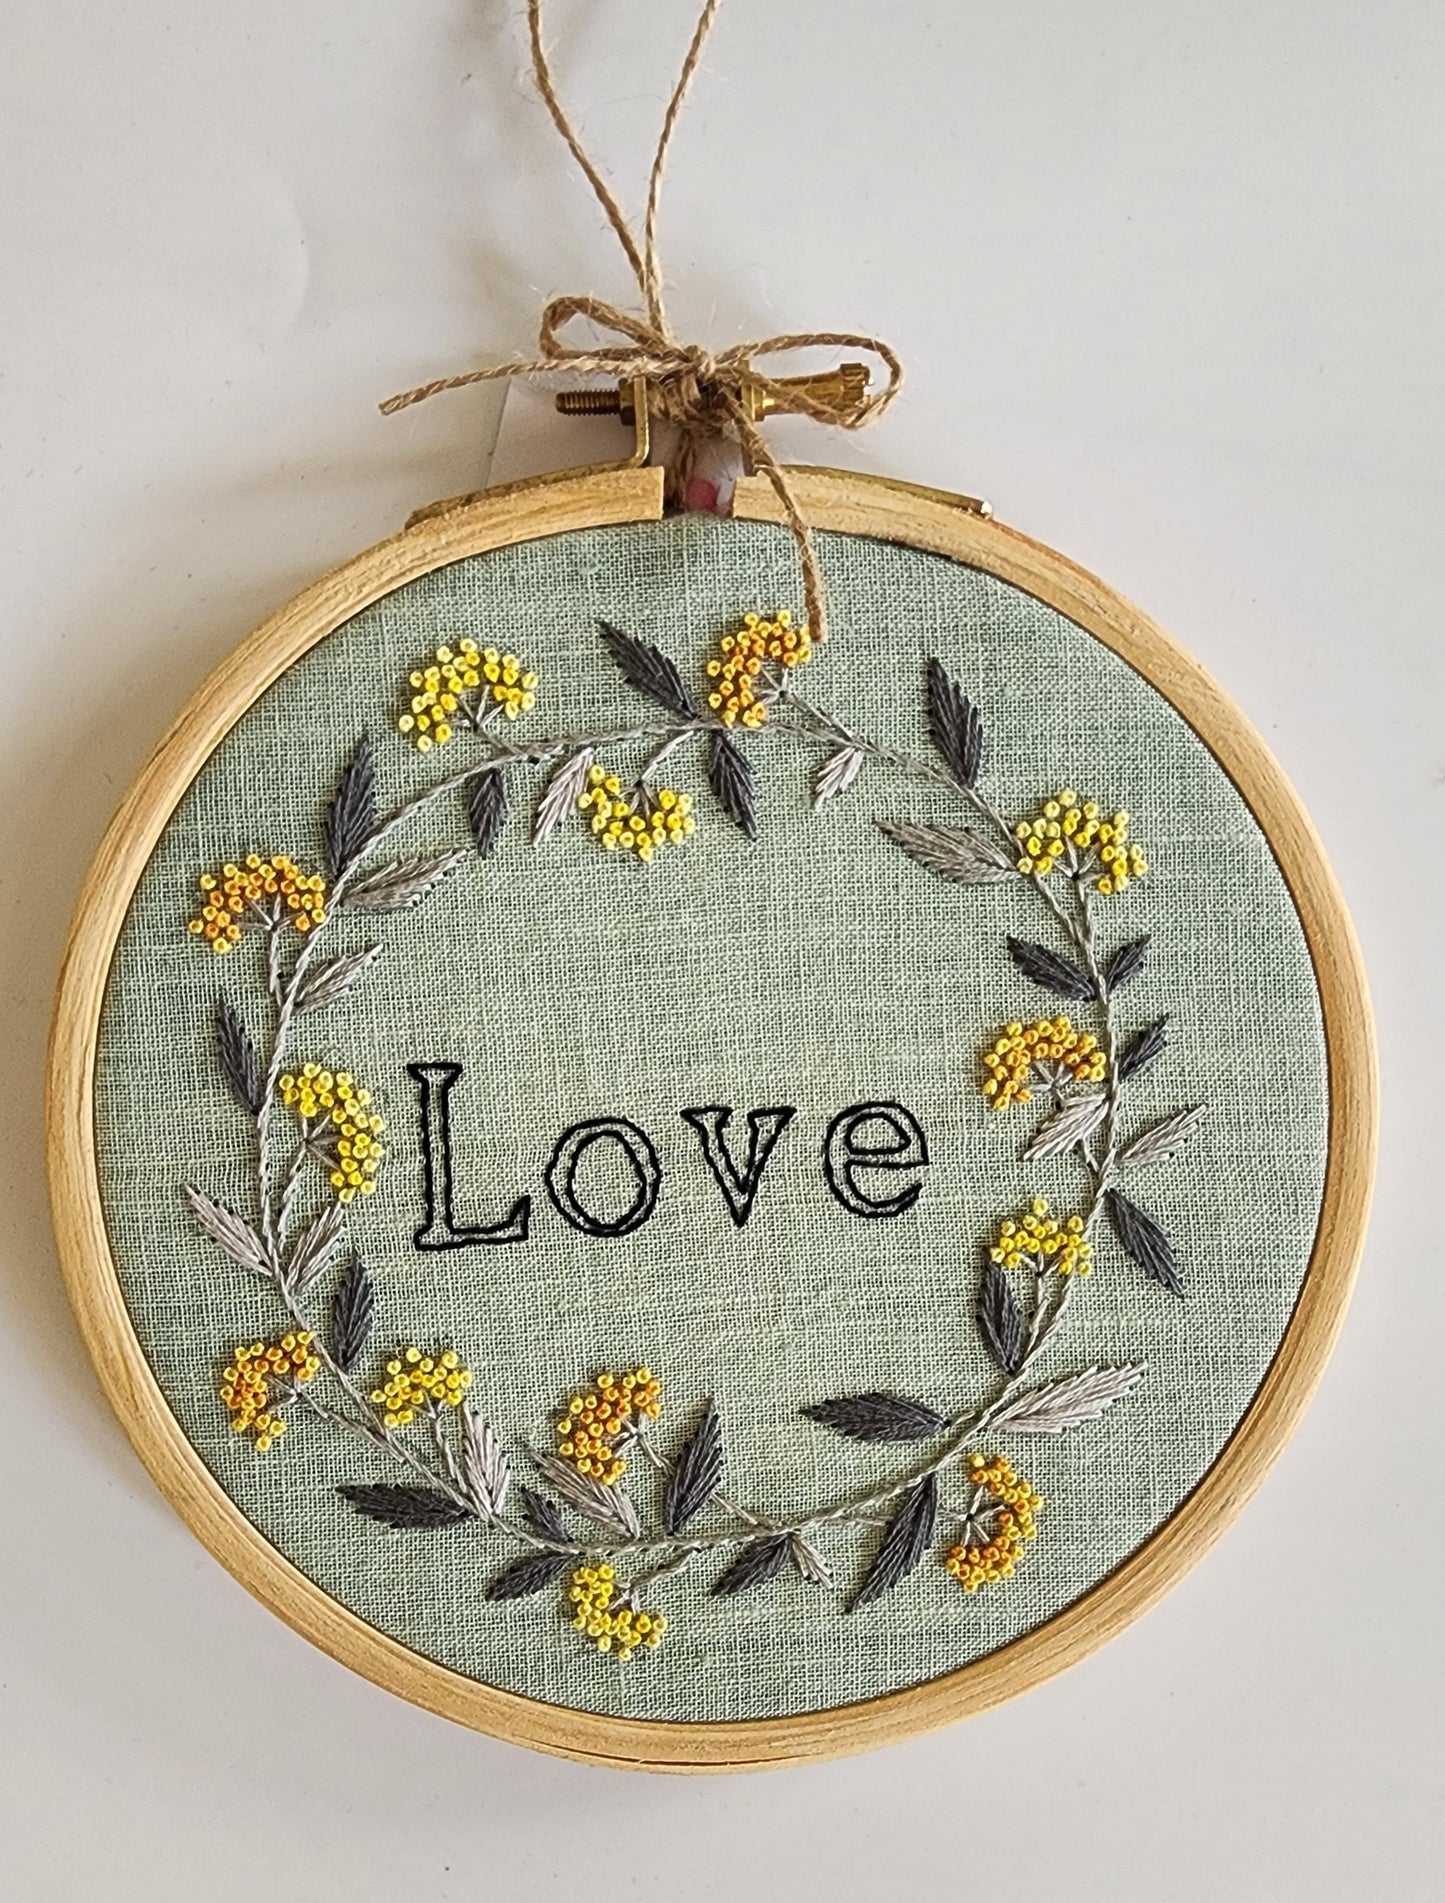 Ikali - Love - Hand-embroidered Wall-hanging Hoop